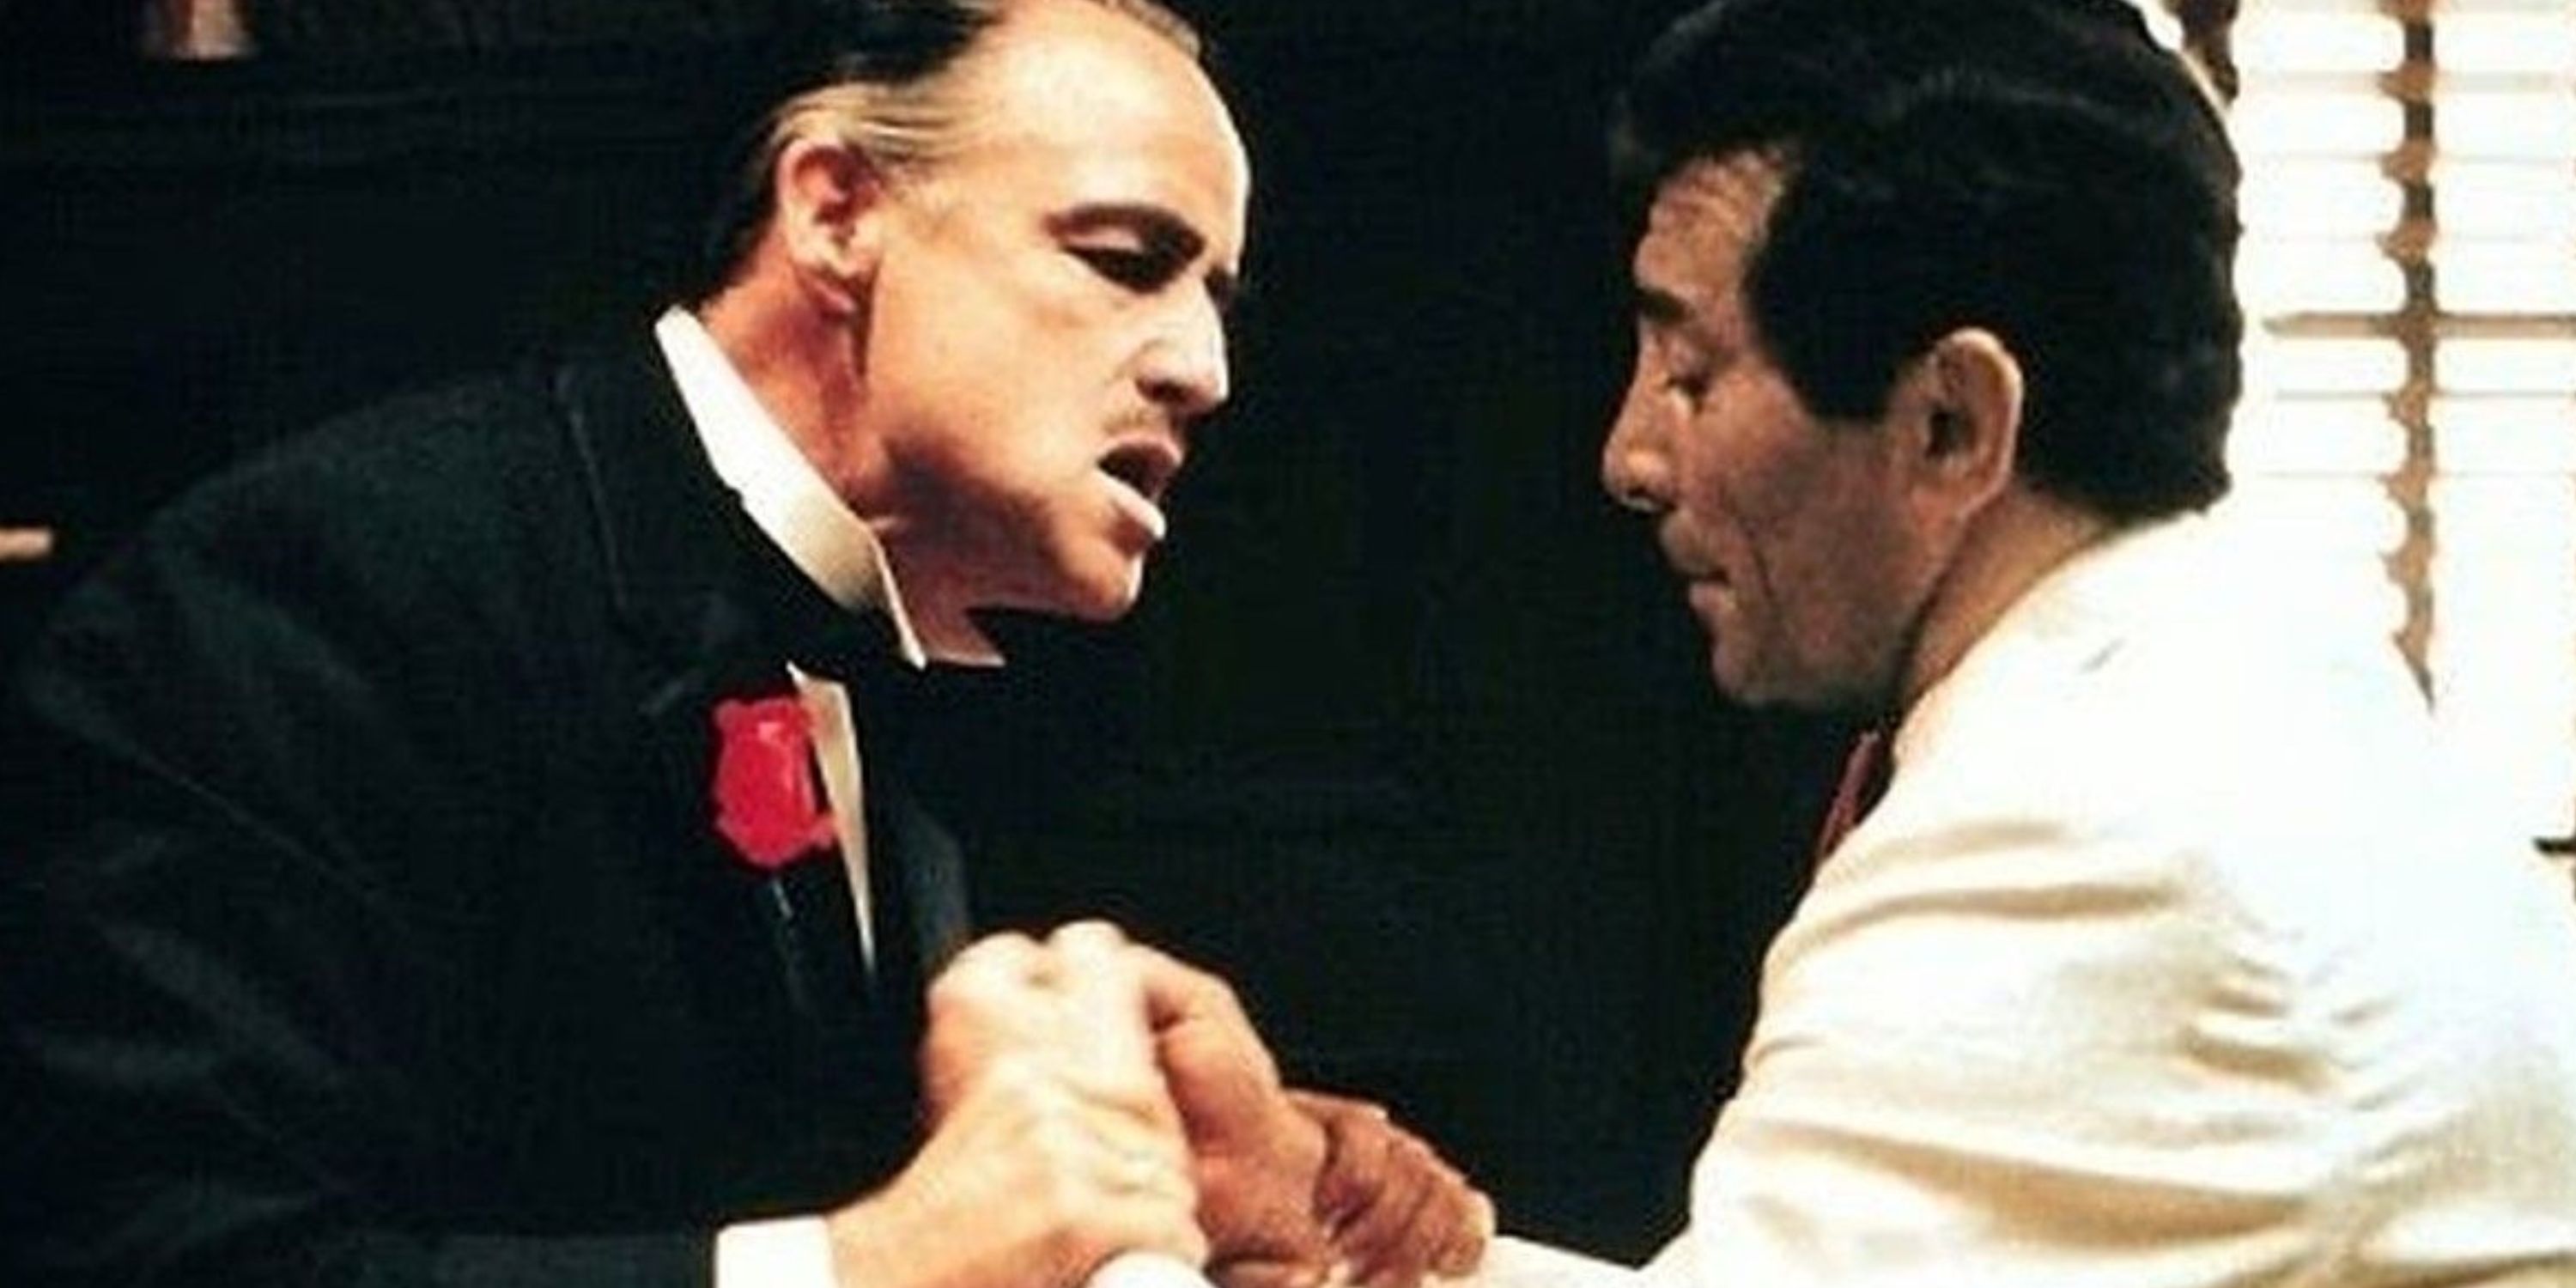 Vito Corleone talking to Johnny Fontane in The Godfather